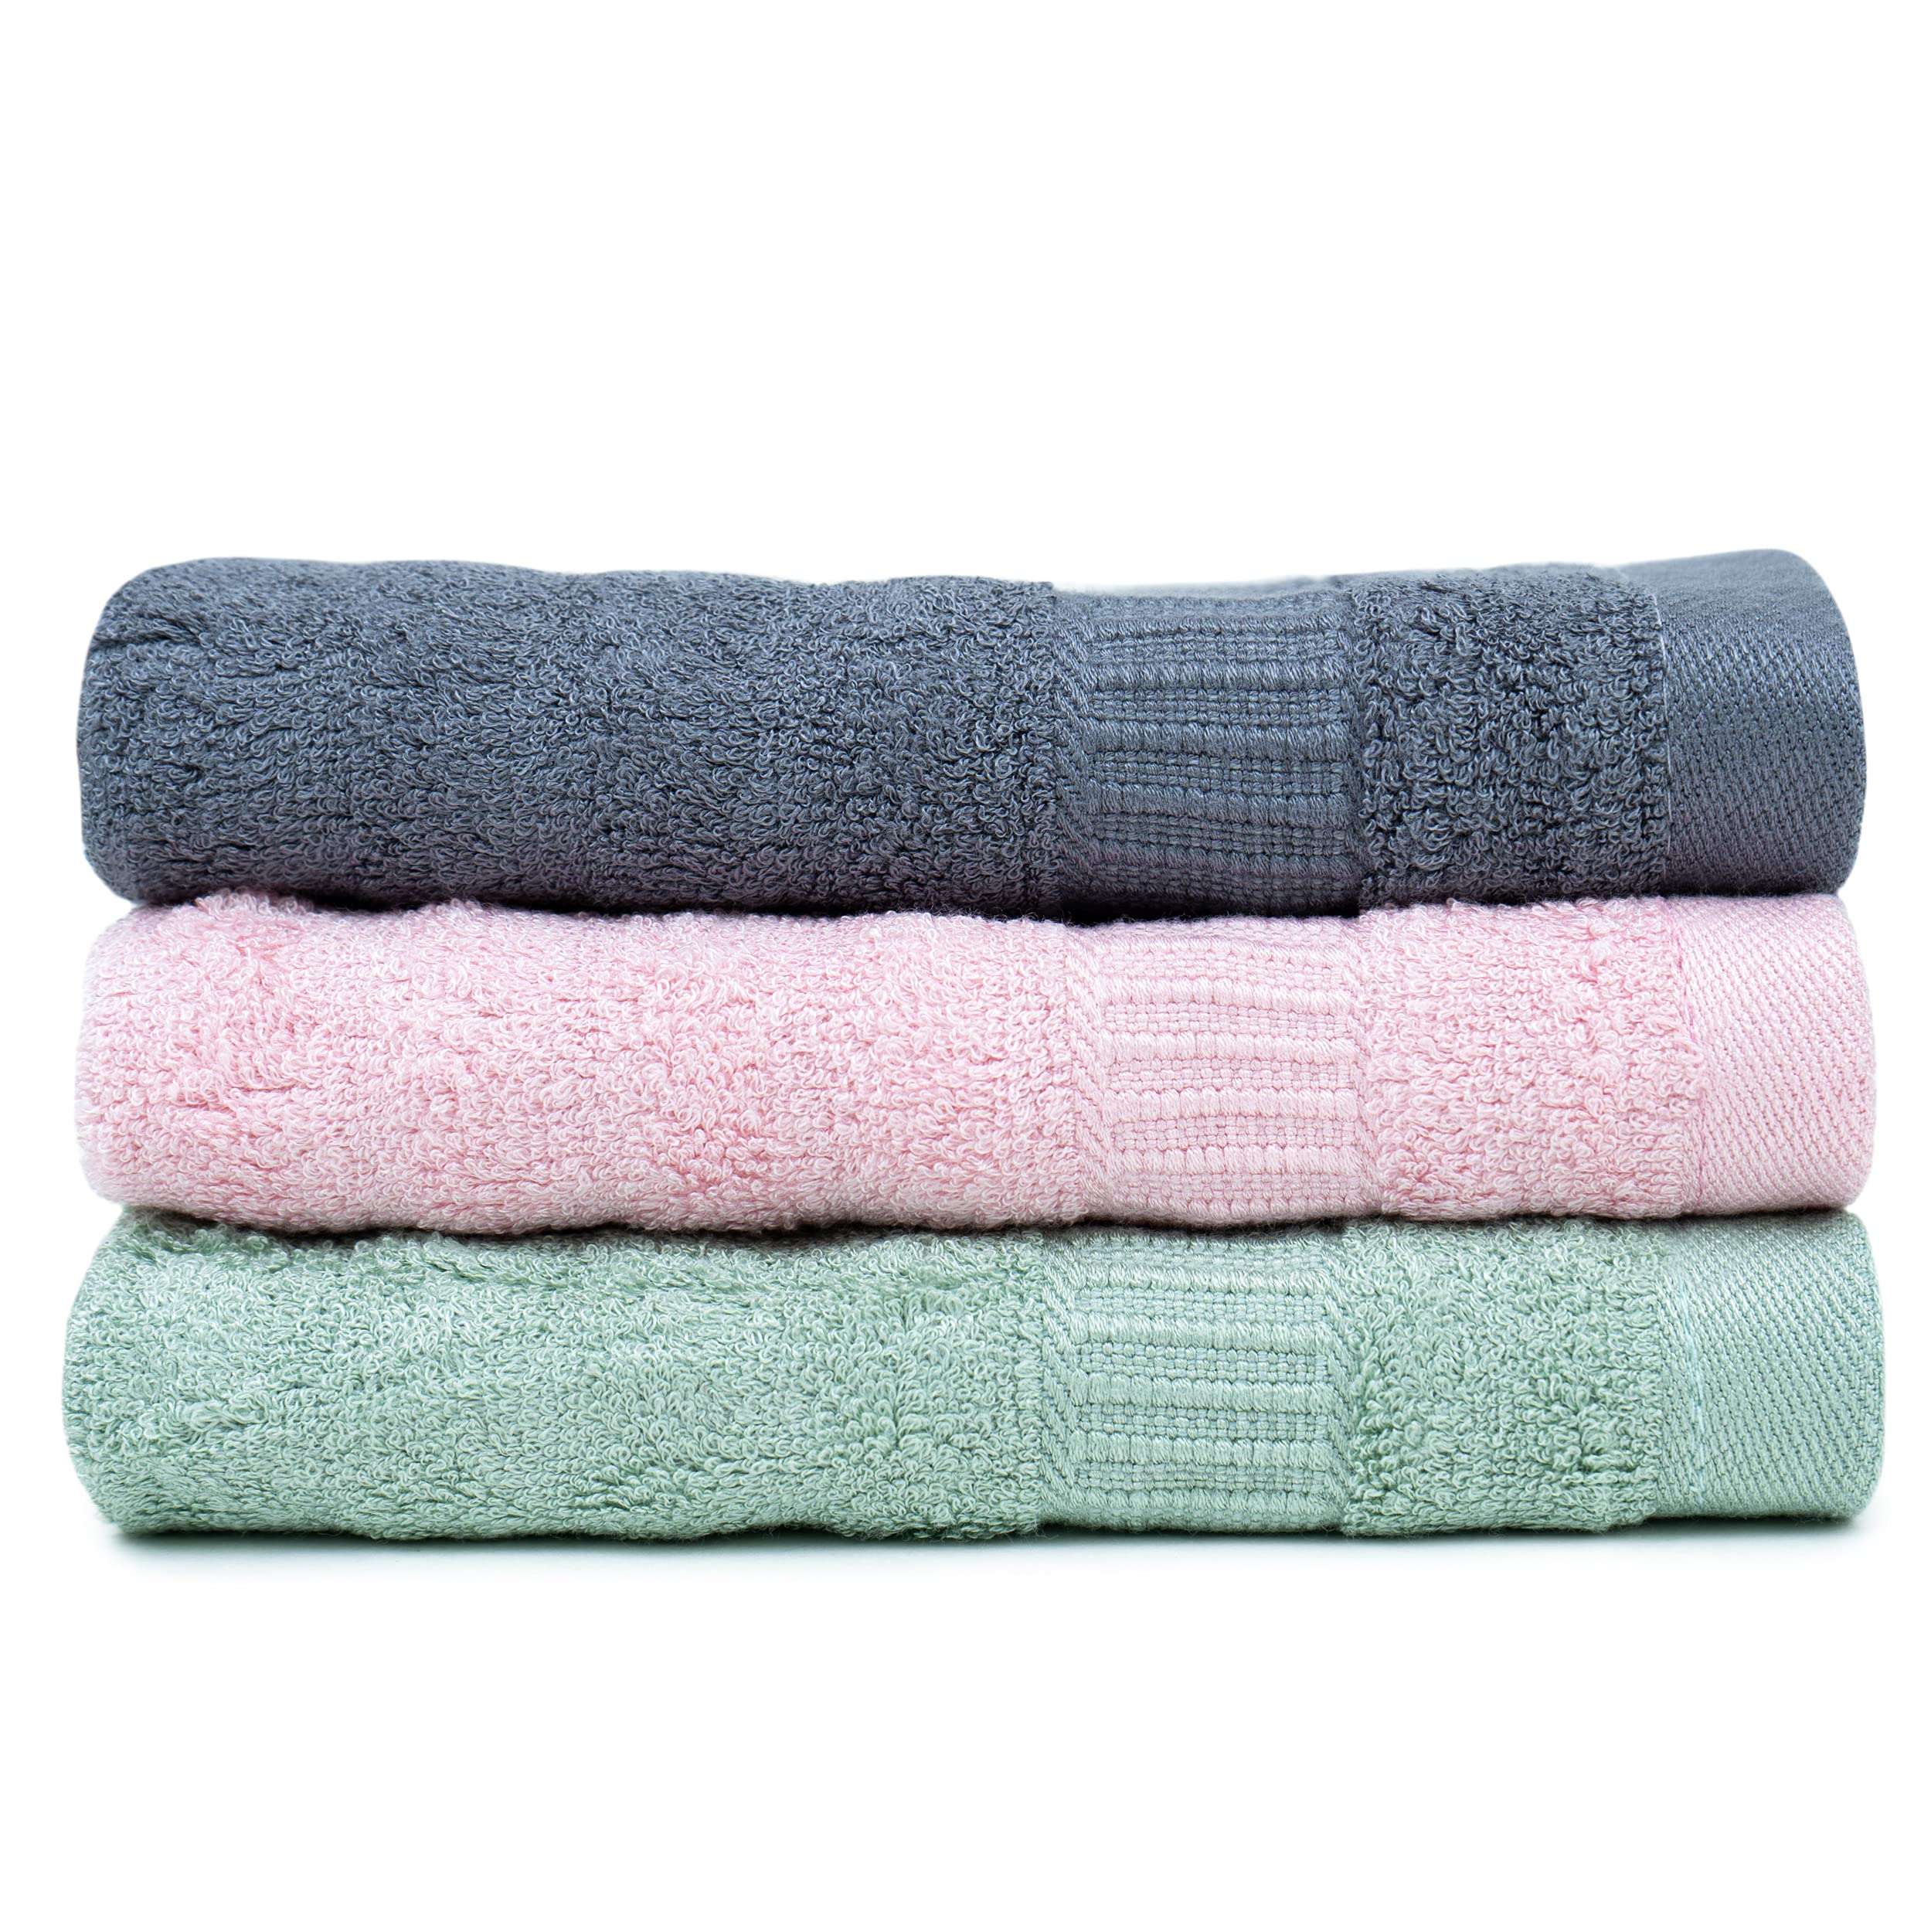 Mush 100% Bamboo Face Towel  Ultra Soft, Absorbent, & Quick Dry